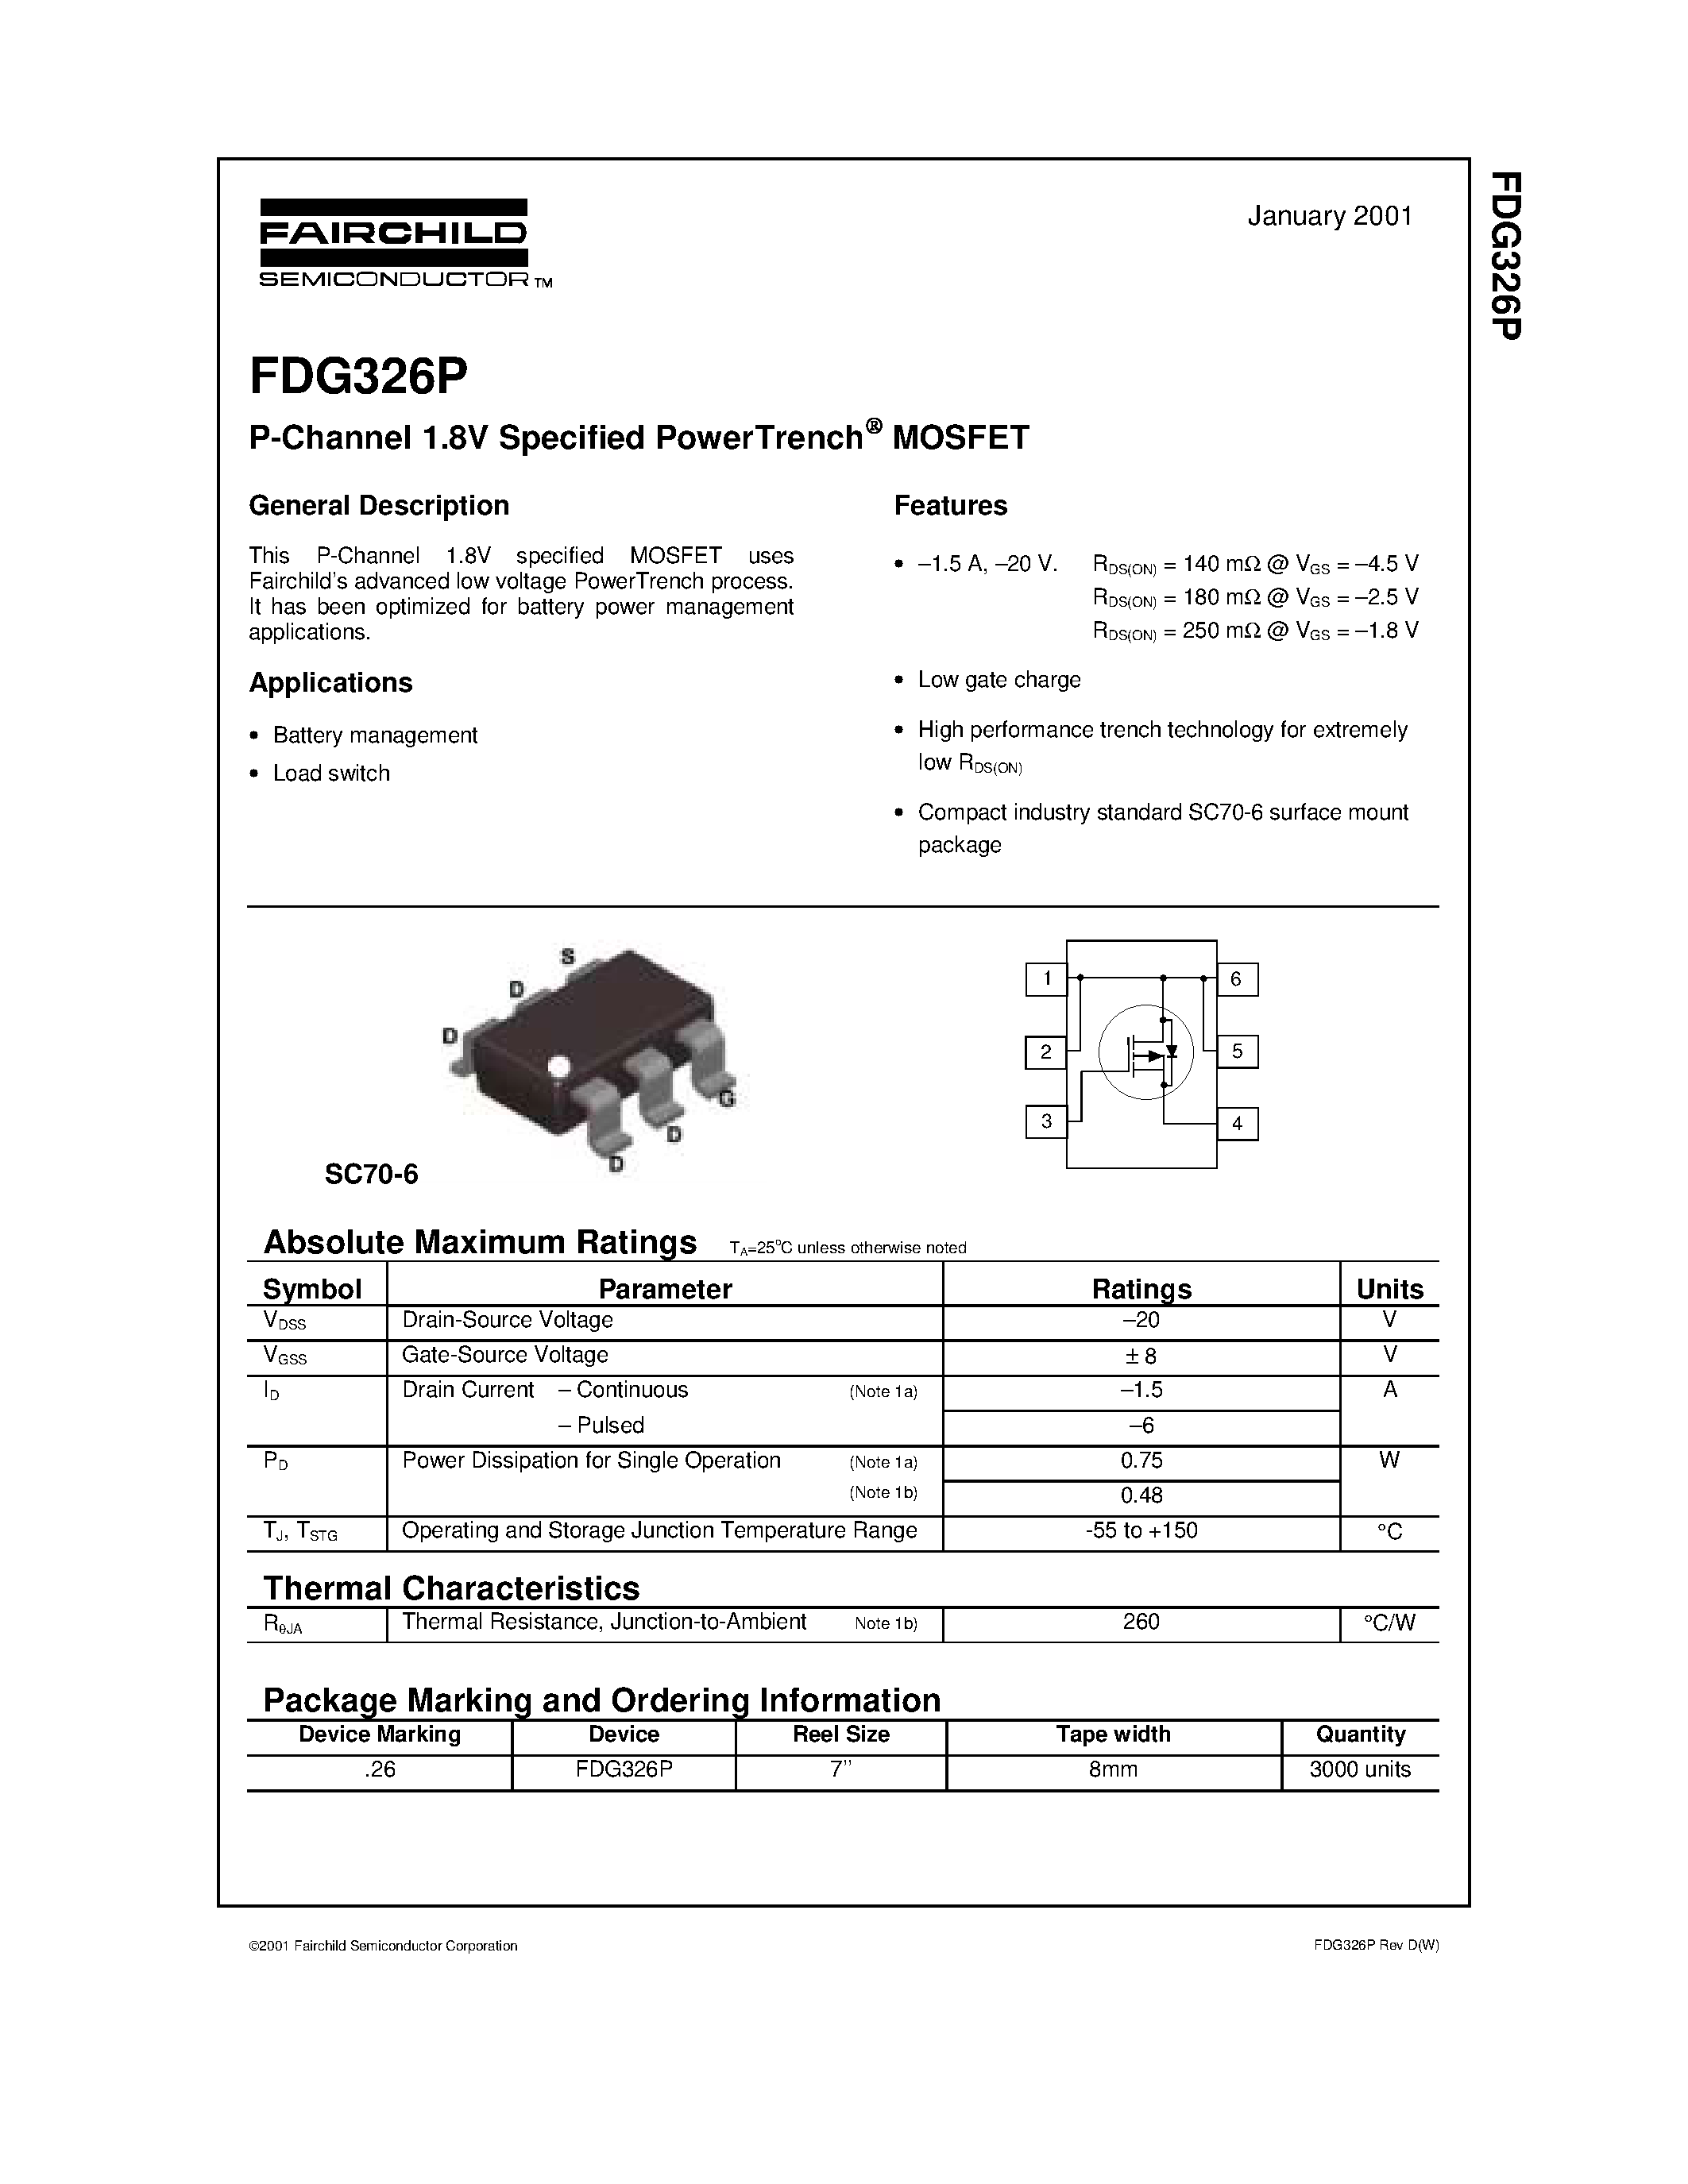 Даташит FDG326-P-Channel 1.8V Specified PowerTrench MOSFET страница 1